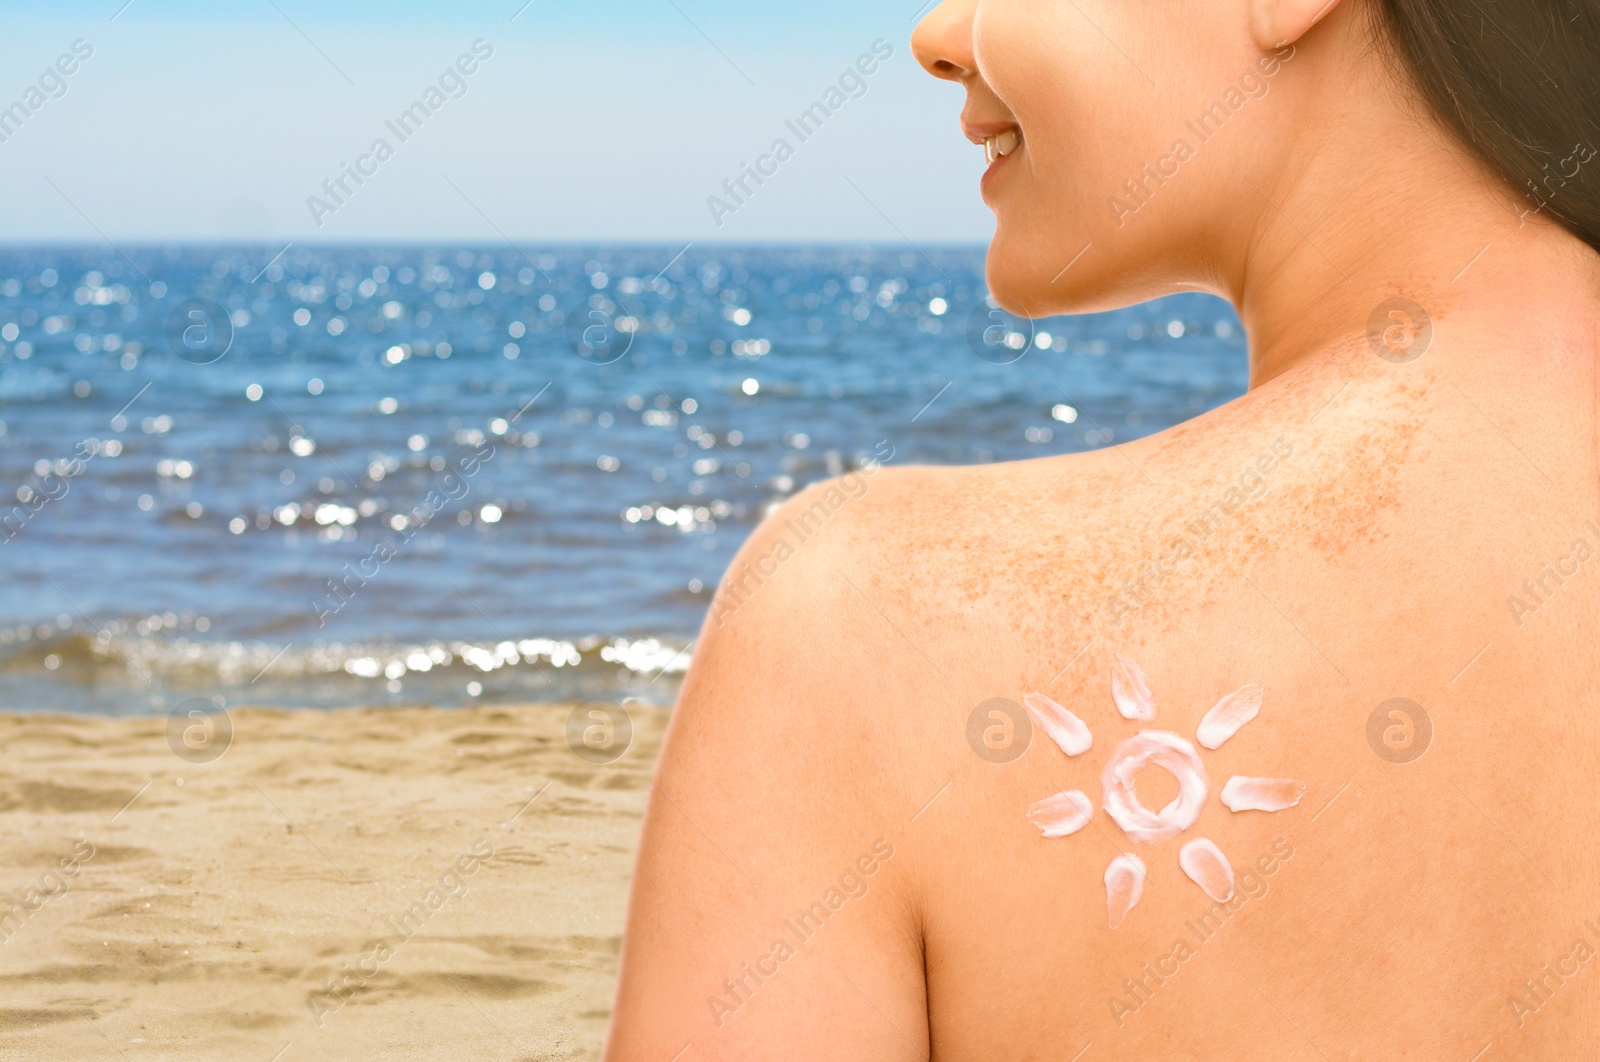 Image of Sun protection. Woman with sunblock on her back near sea, closeup